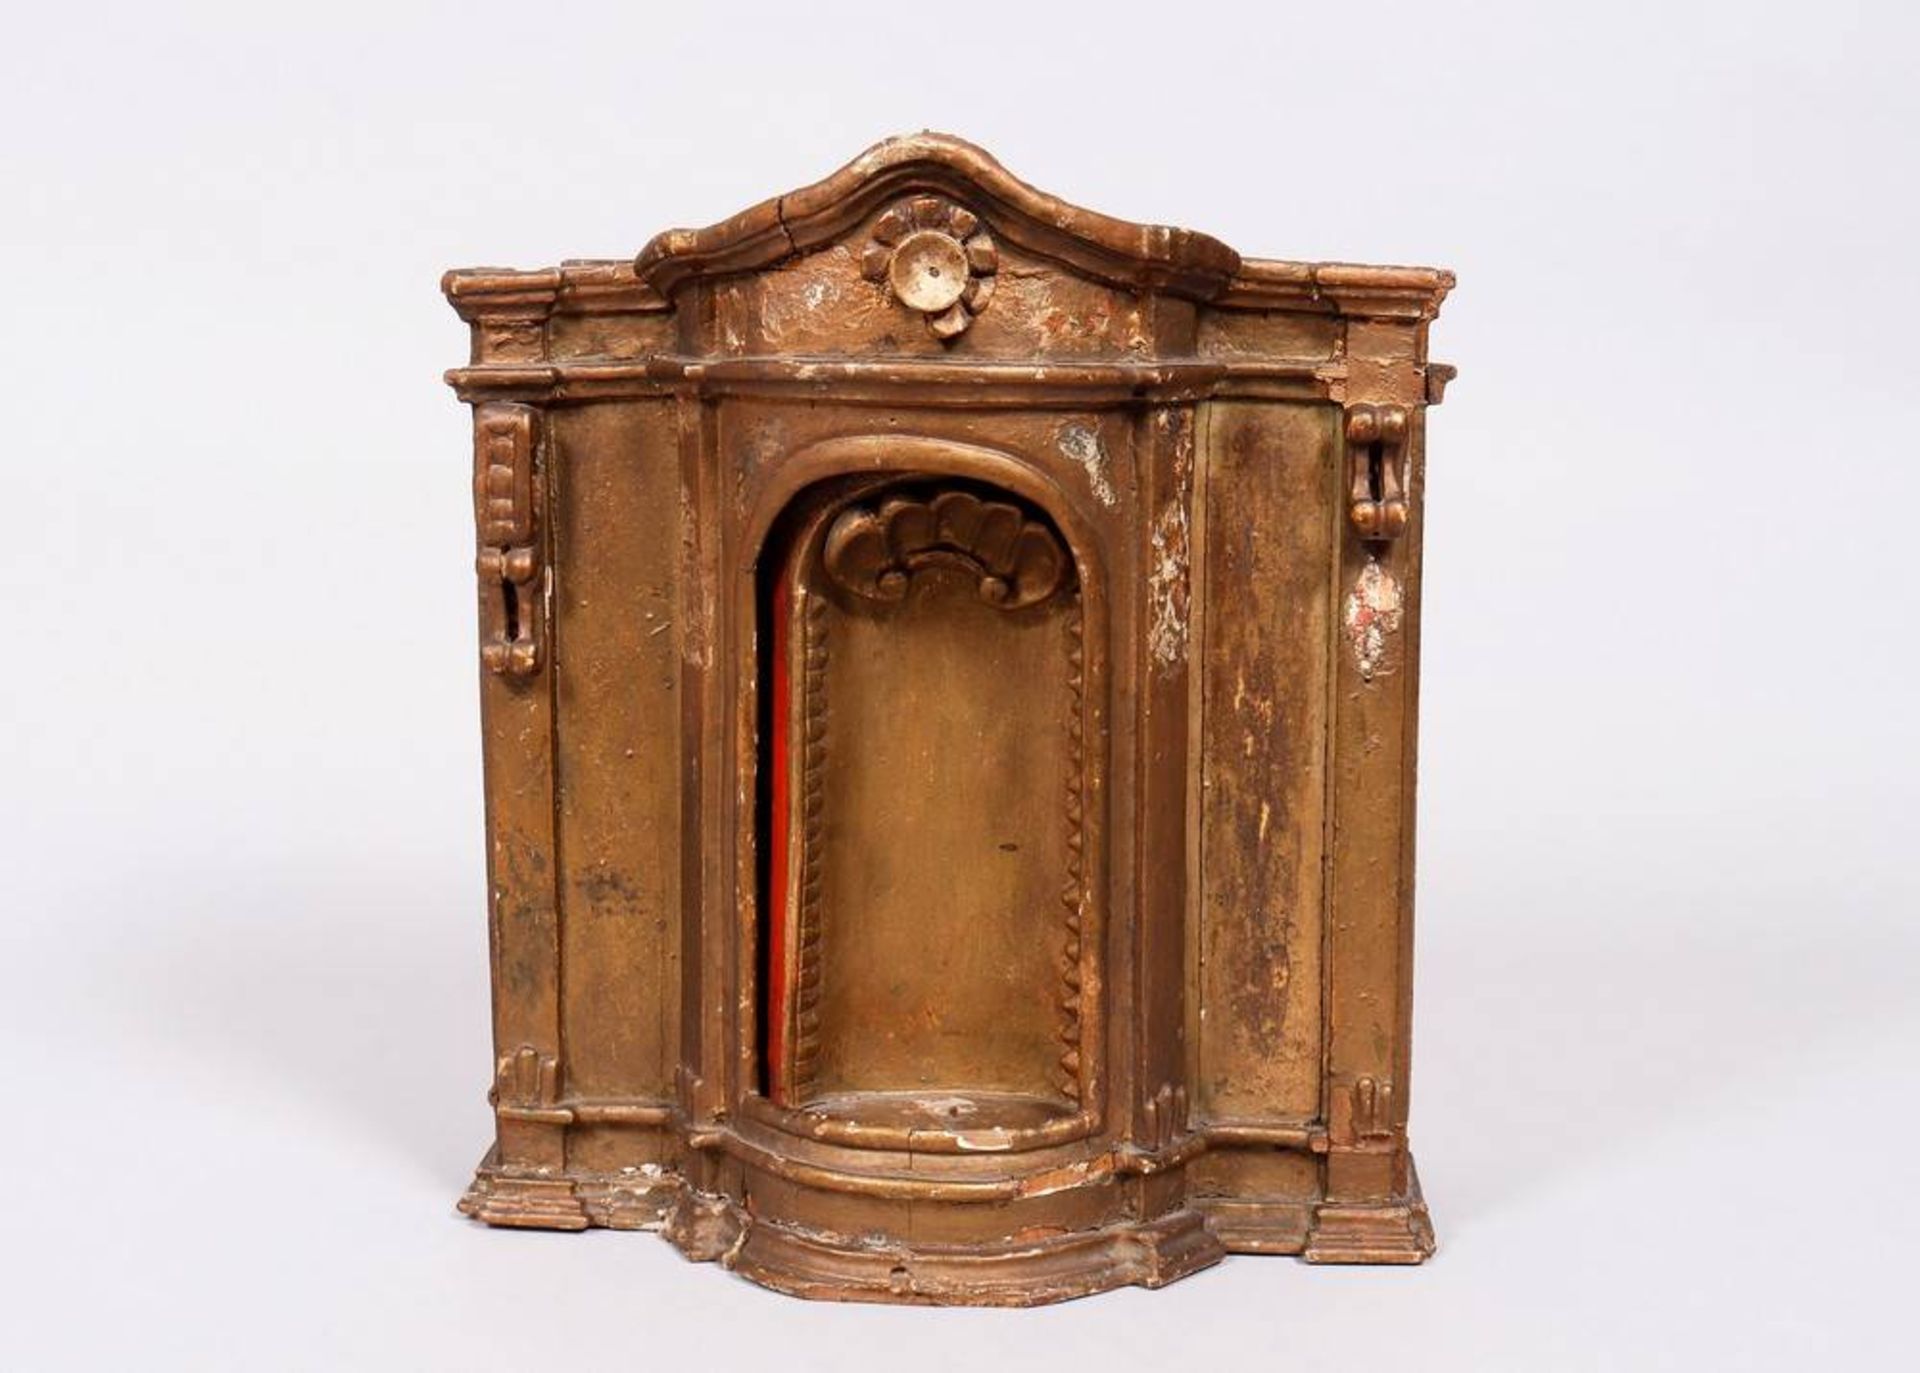 Small baroque house altar, probably South German, 18th C.